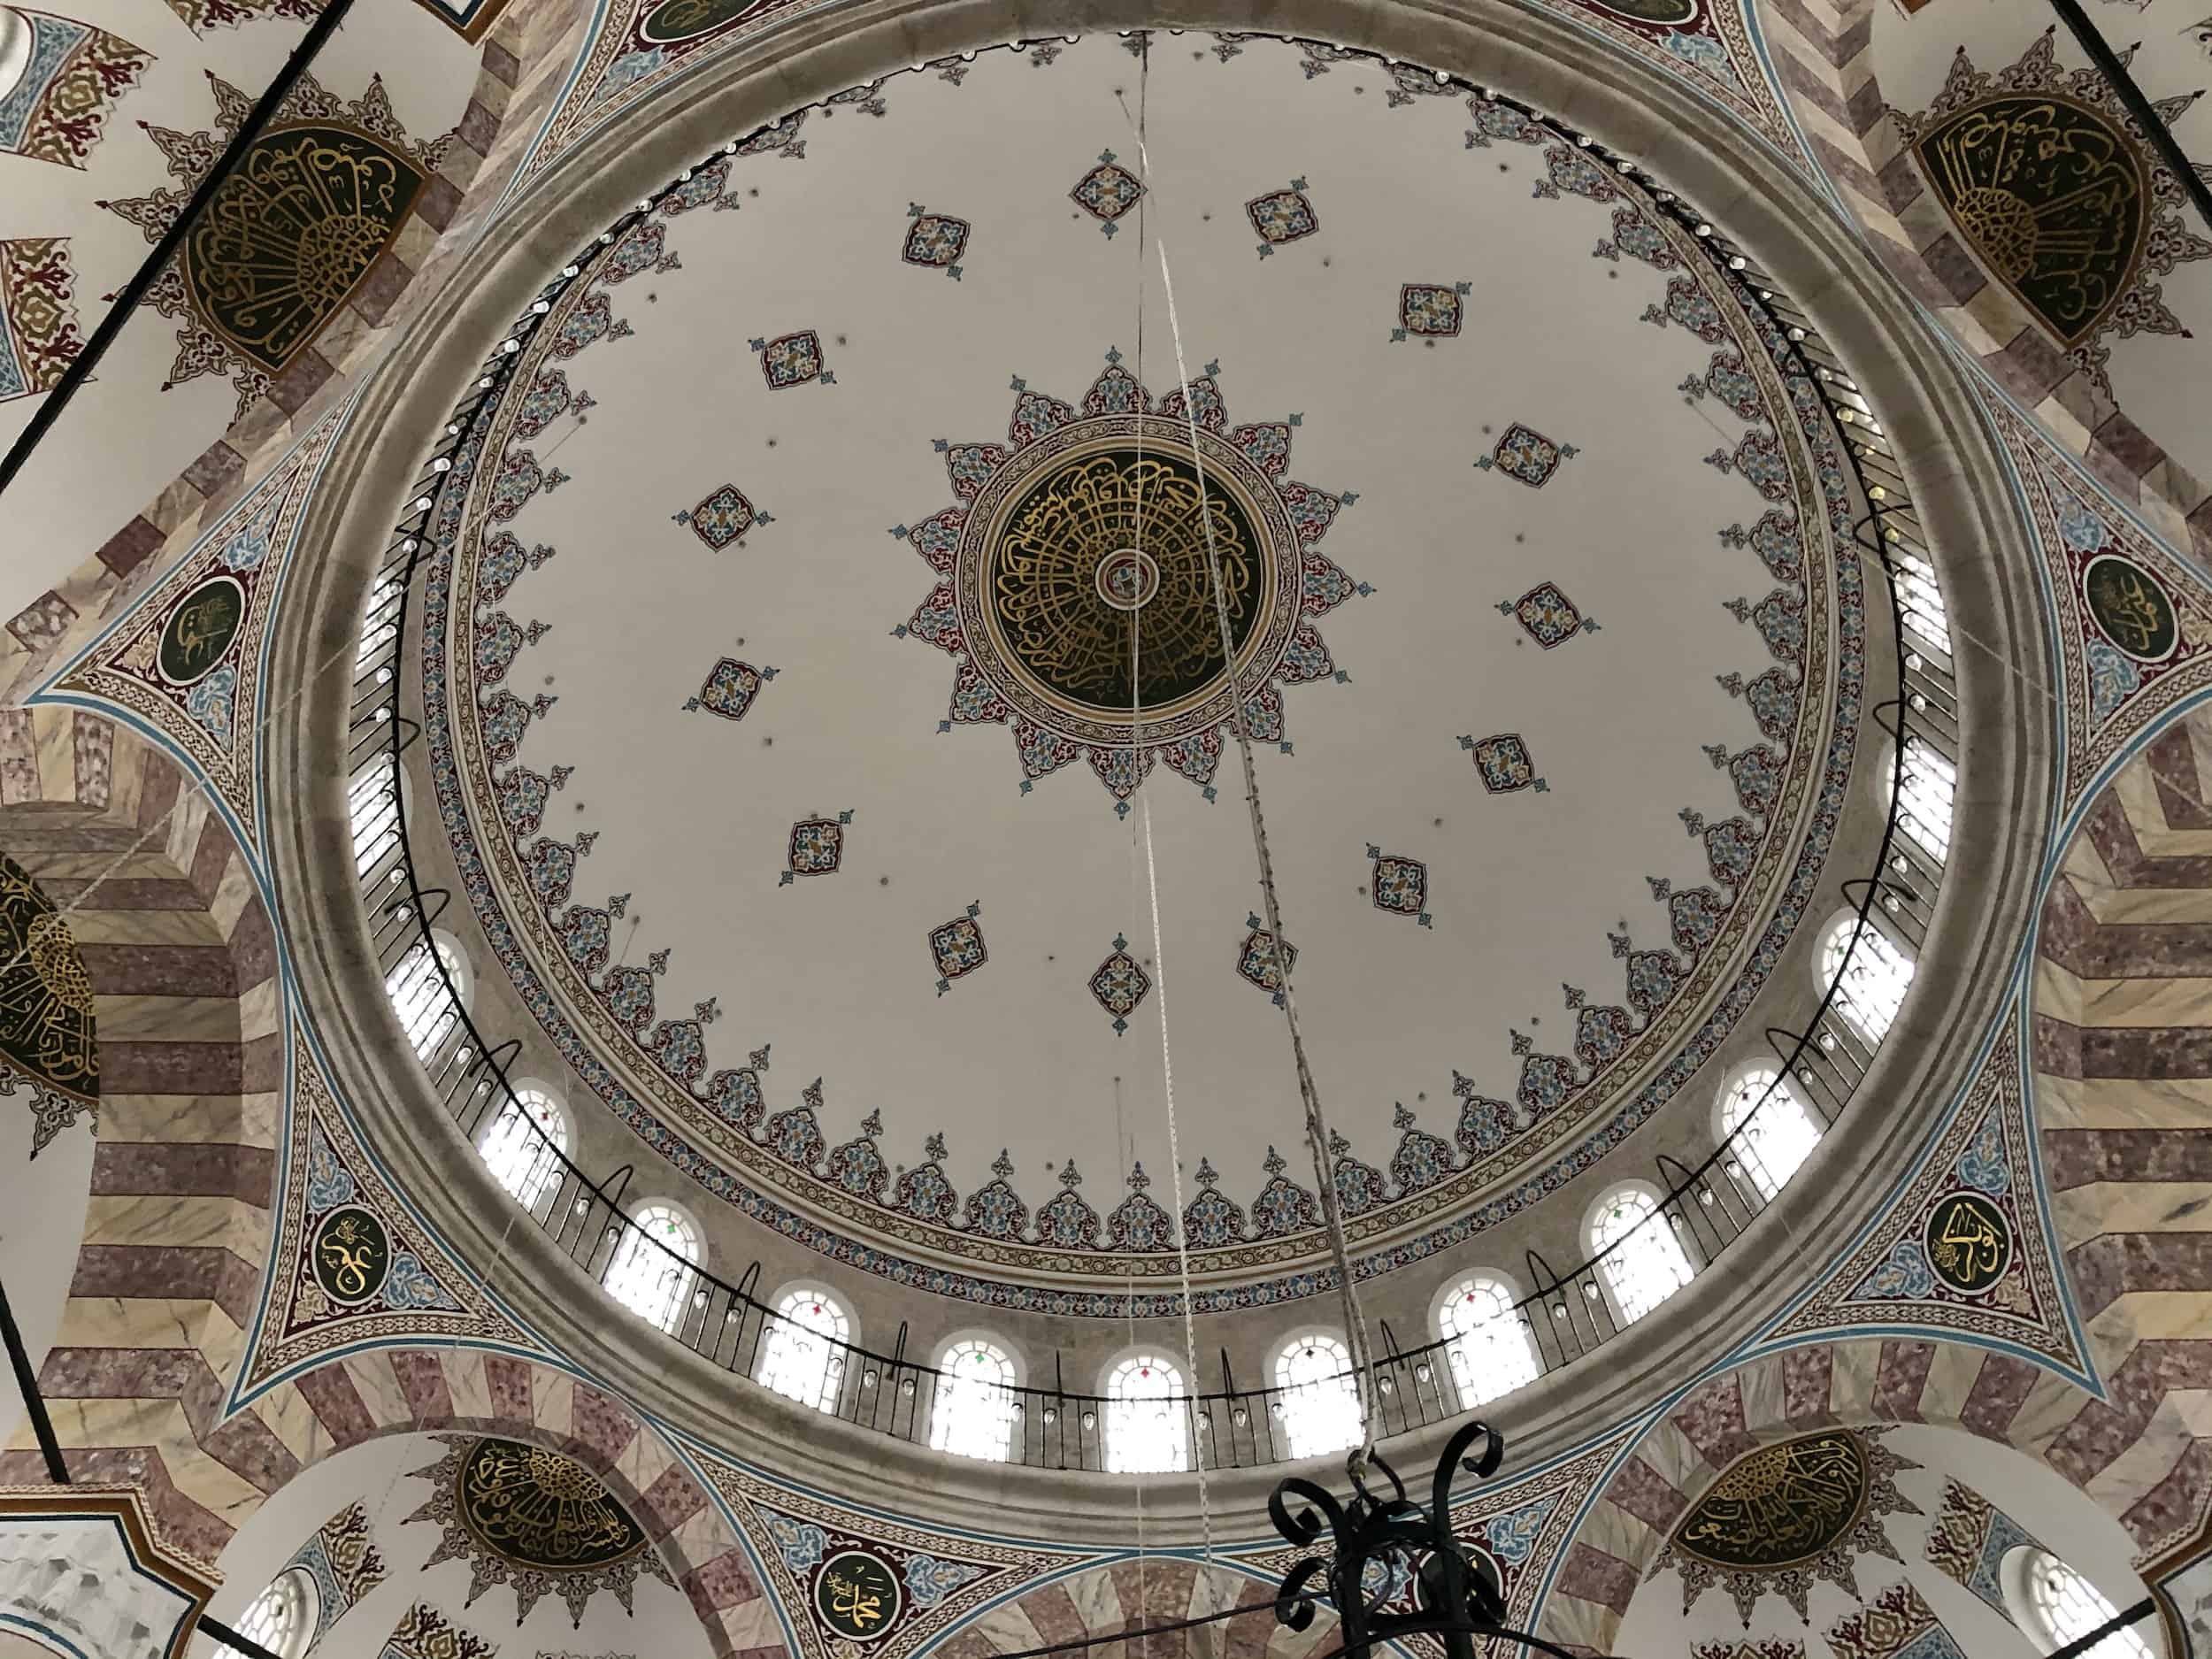 Dome of the Nişancı Mehmed Pasha Mosque in Fatih, Istanbul, Turkey